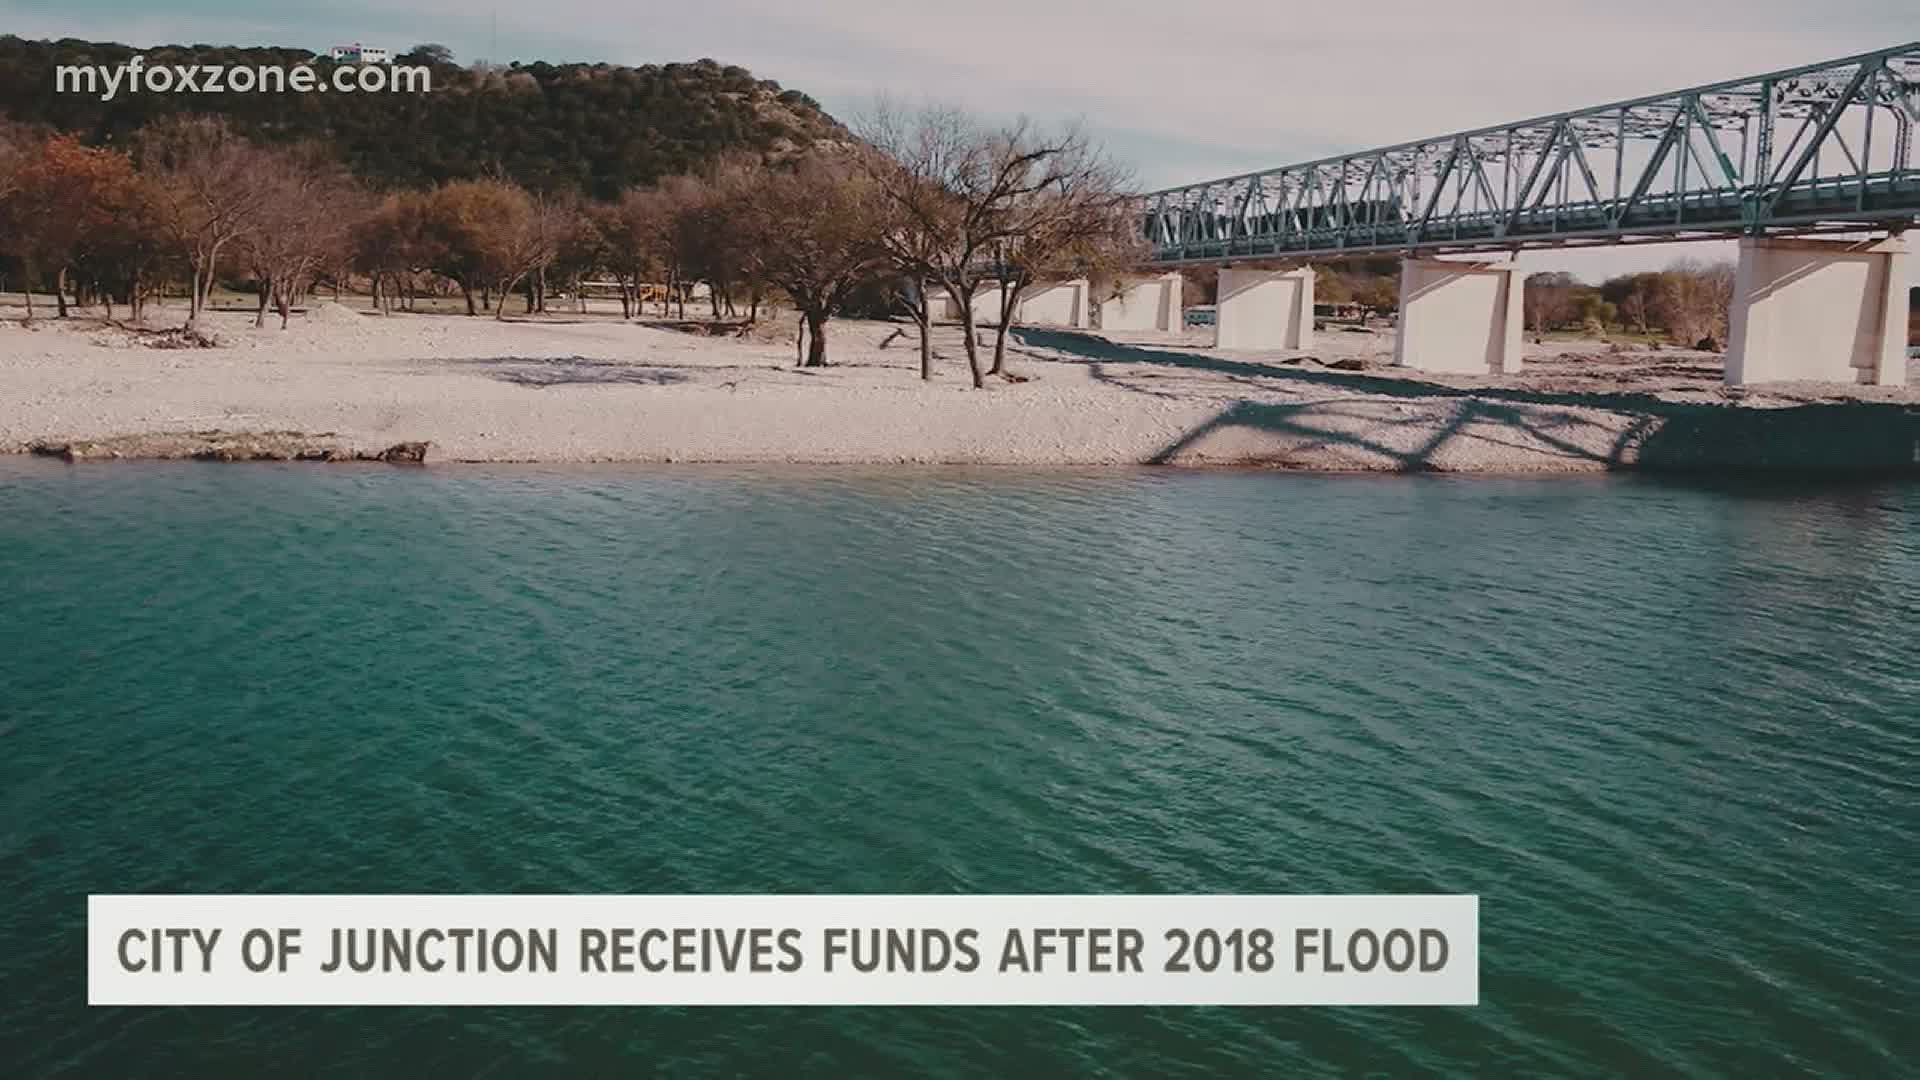 Mayor William Hammonds says the City now has access to more than $5 million from the Texas Water Development Board and can start need repairs to the dam soon.